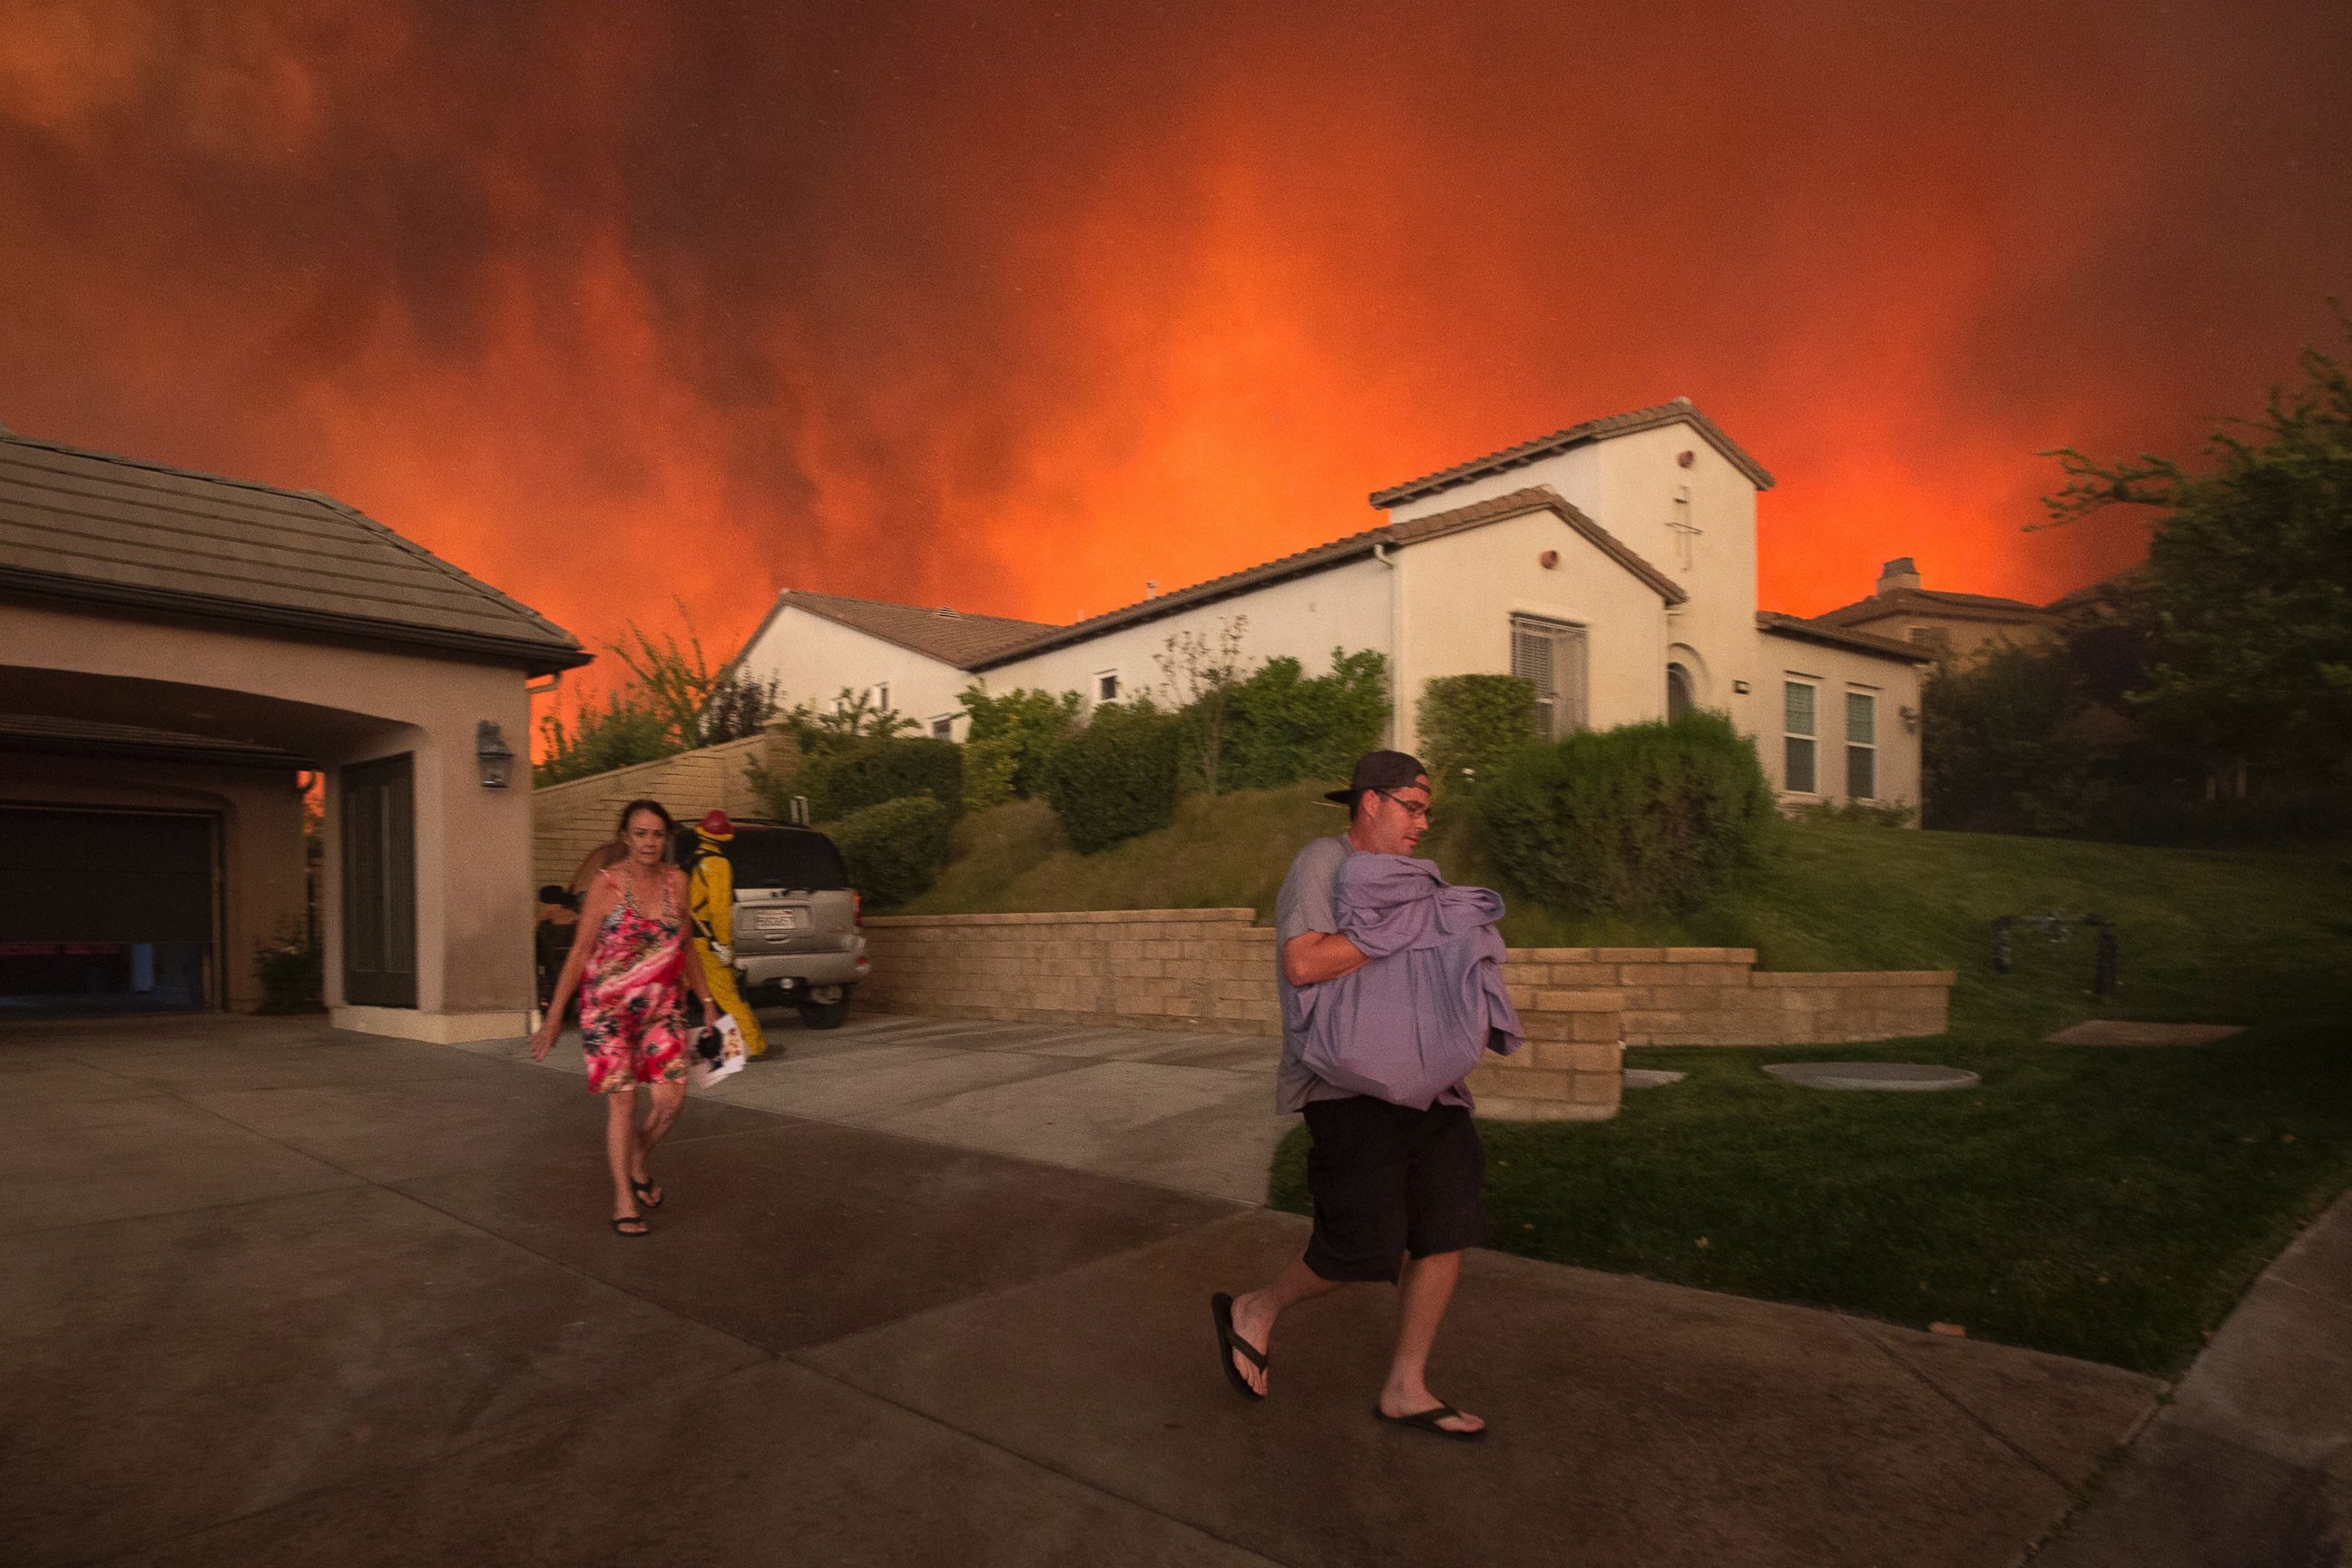 PHOTO: Residents flee their home as flames from the Sand Fire close in, July 23 2016 near Santa Clarita, California. 
